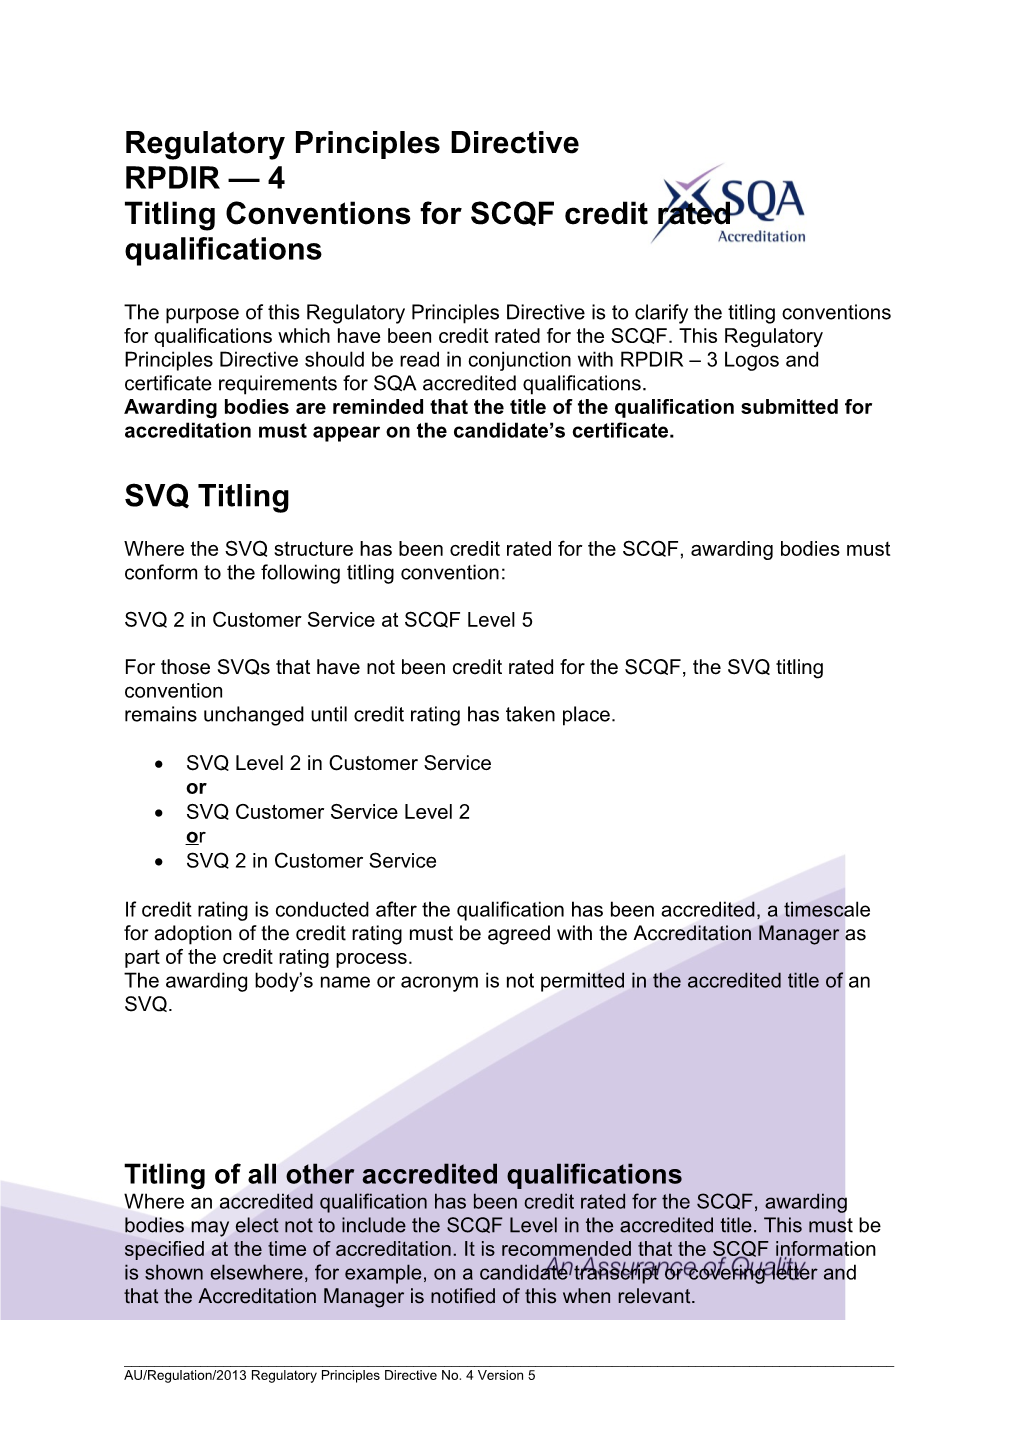 Titling Conventions for SCQF Credit Rated Qualifications